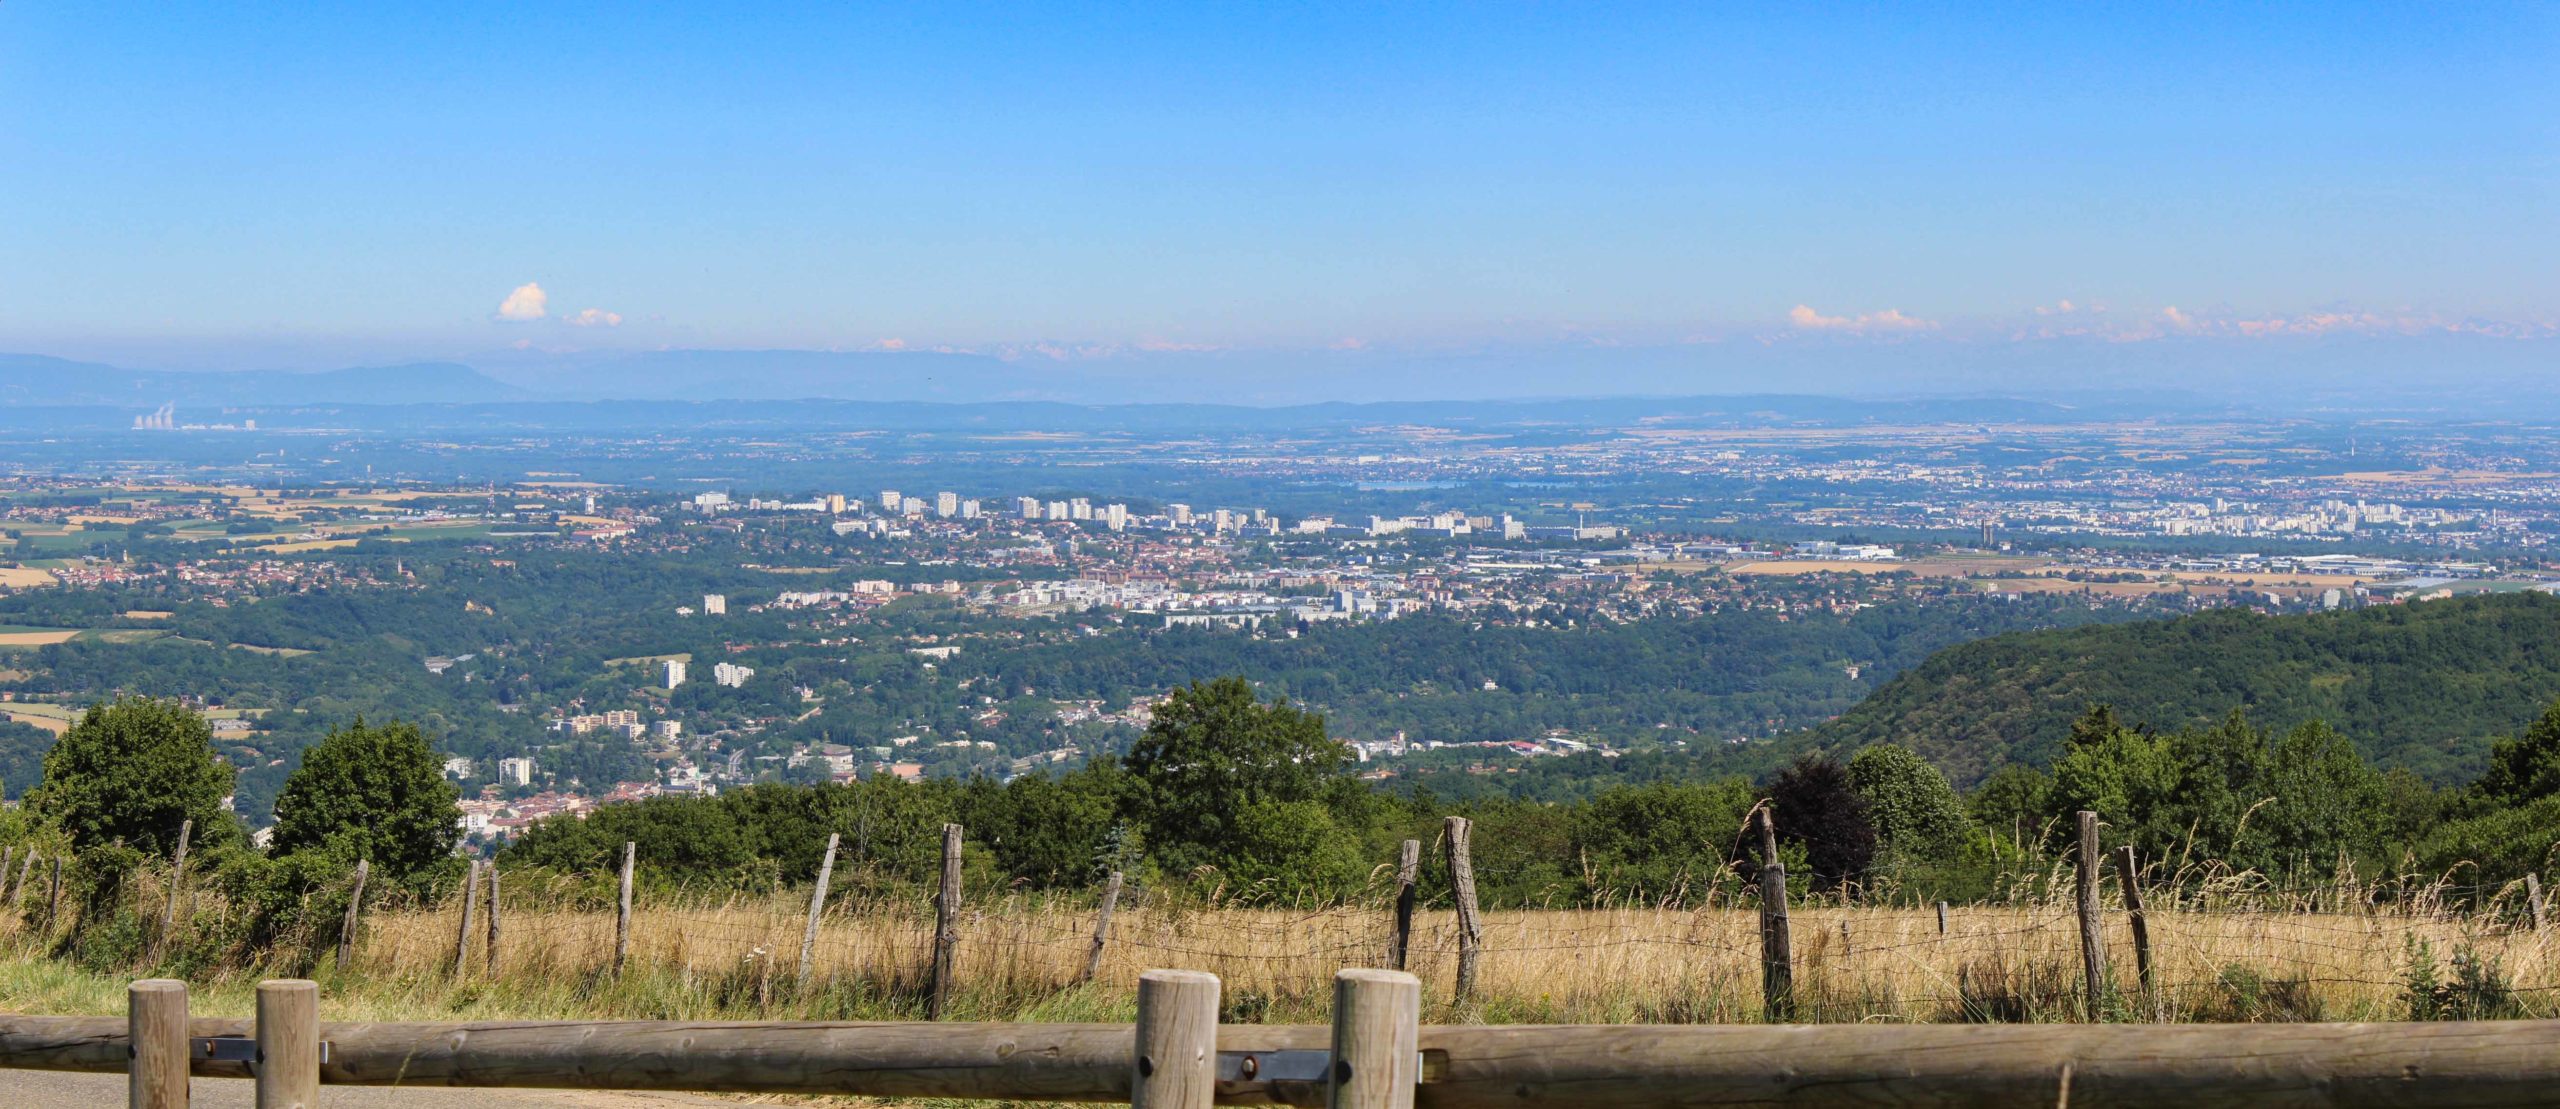 Around Lyon - The view from Mont Thou © Xavier Caré - licence [CC BY-SA 3.0] from Wikimedia Commons